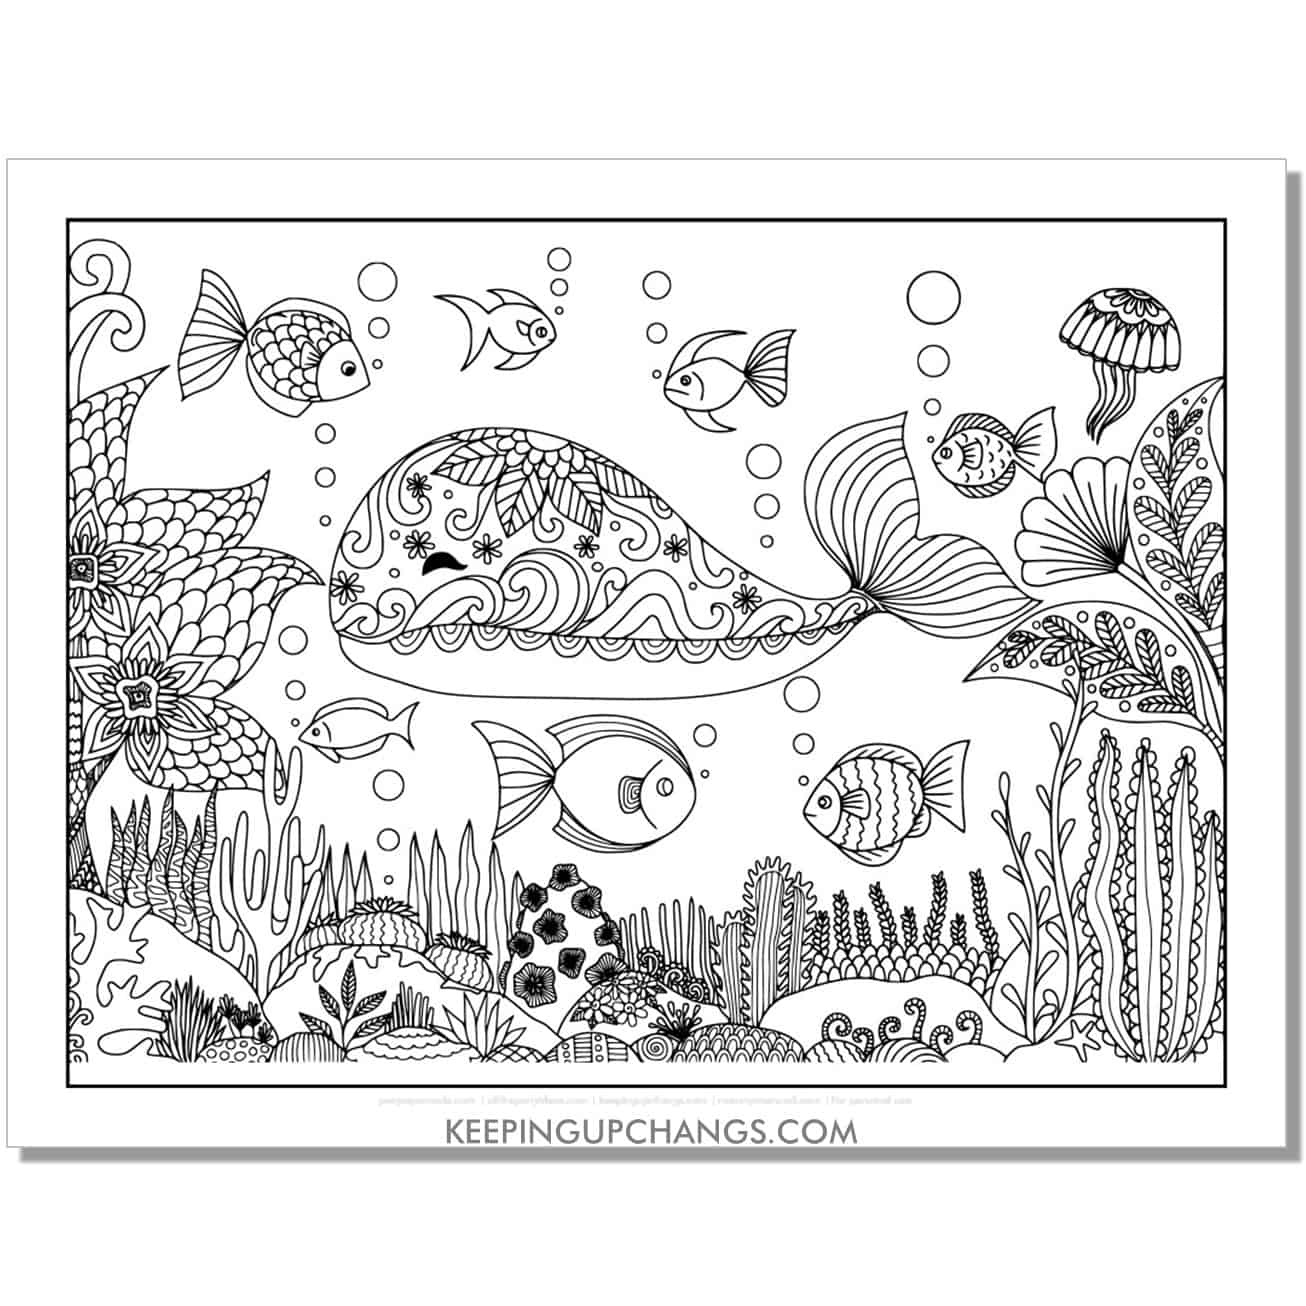 free detailed whale coloring page, sheet for adults.